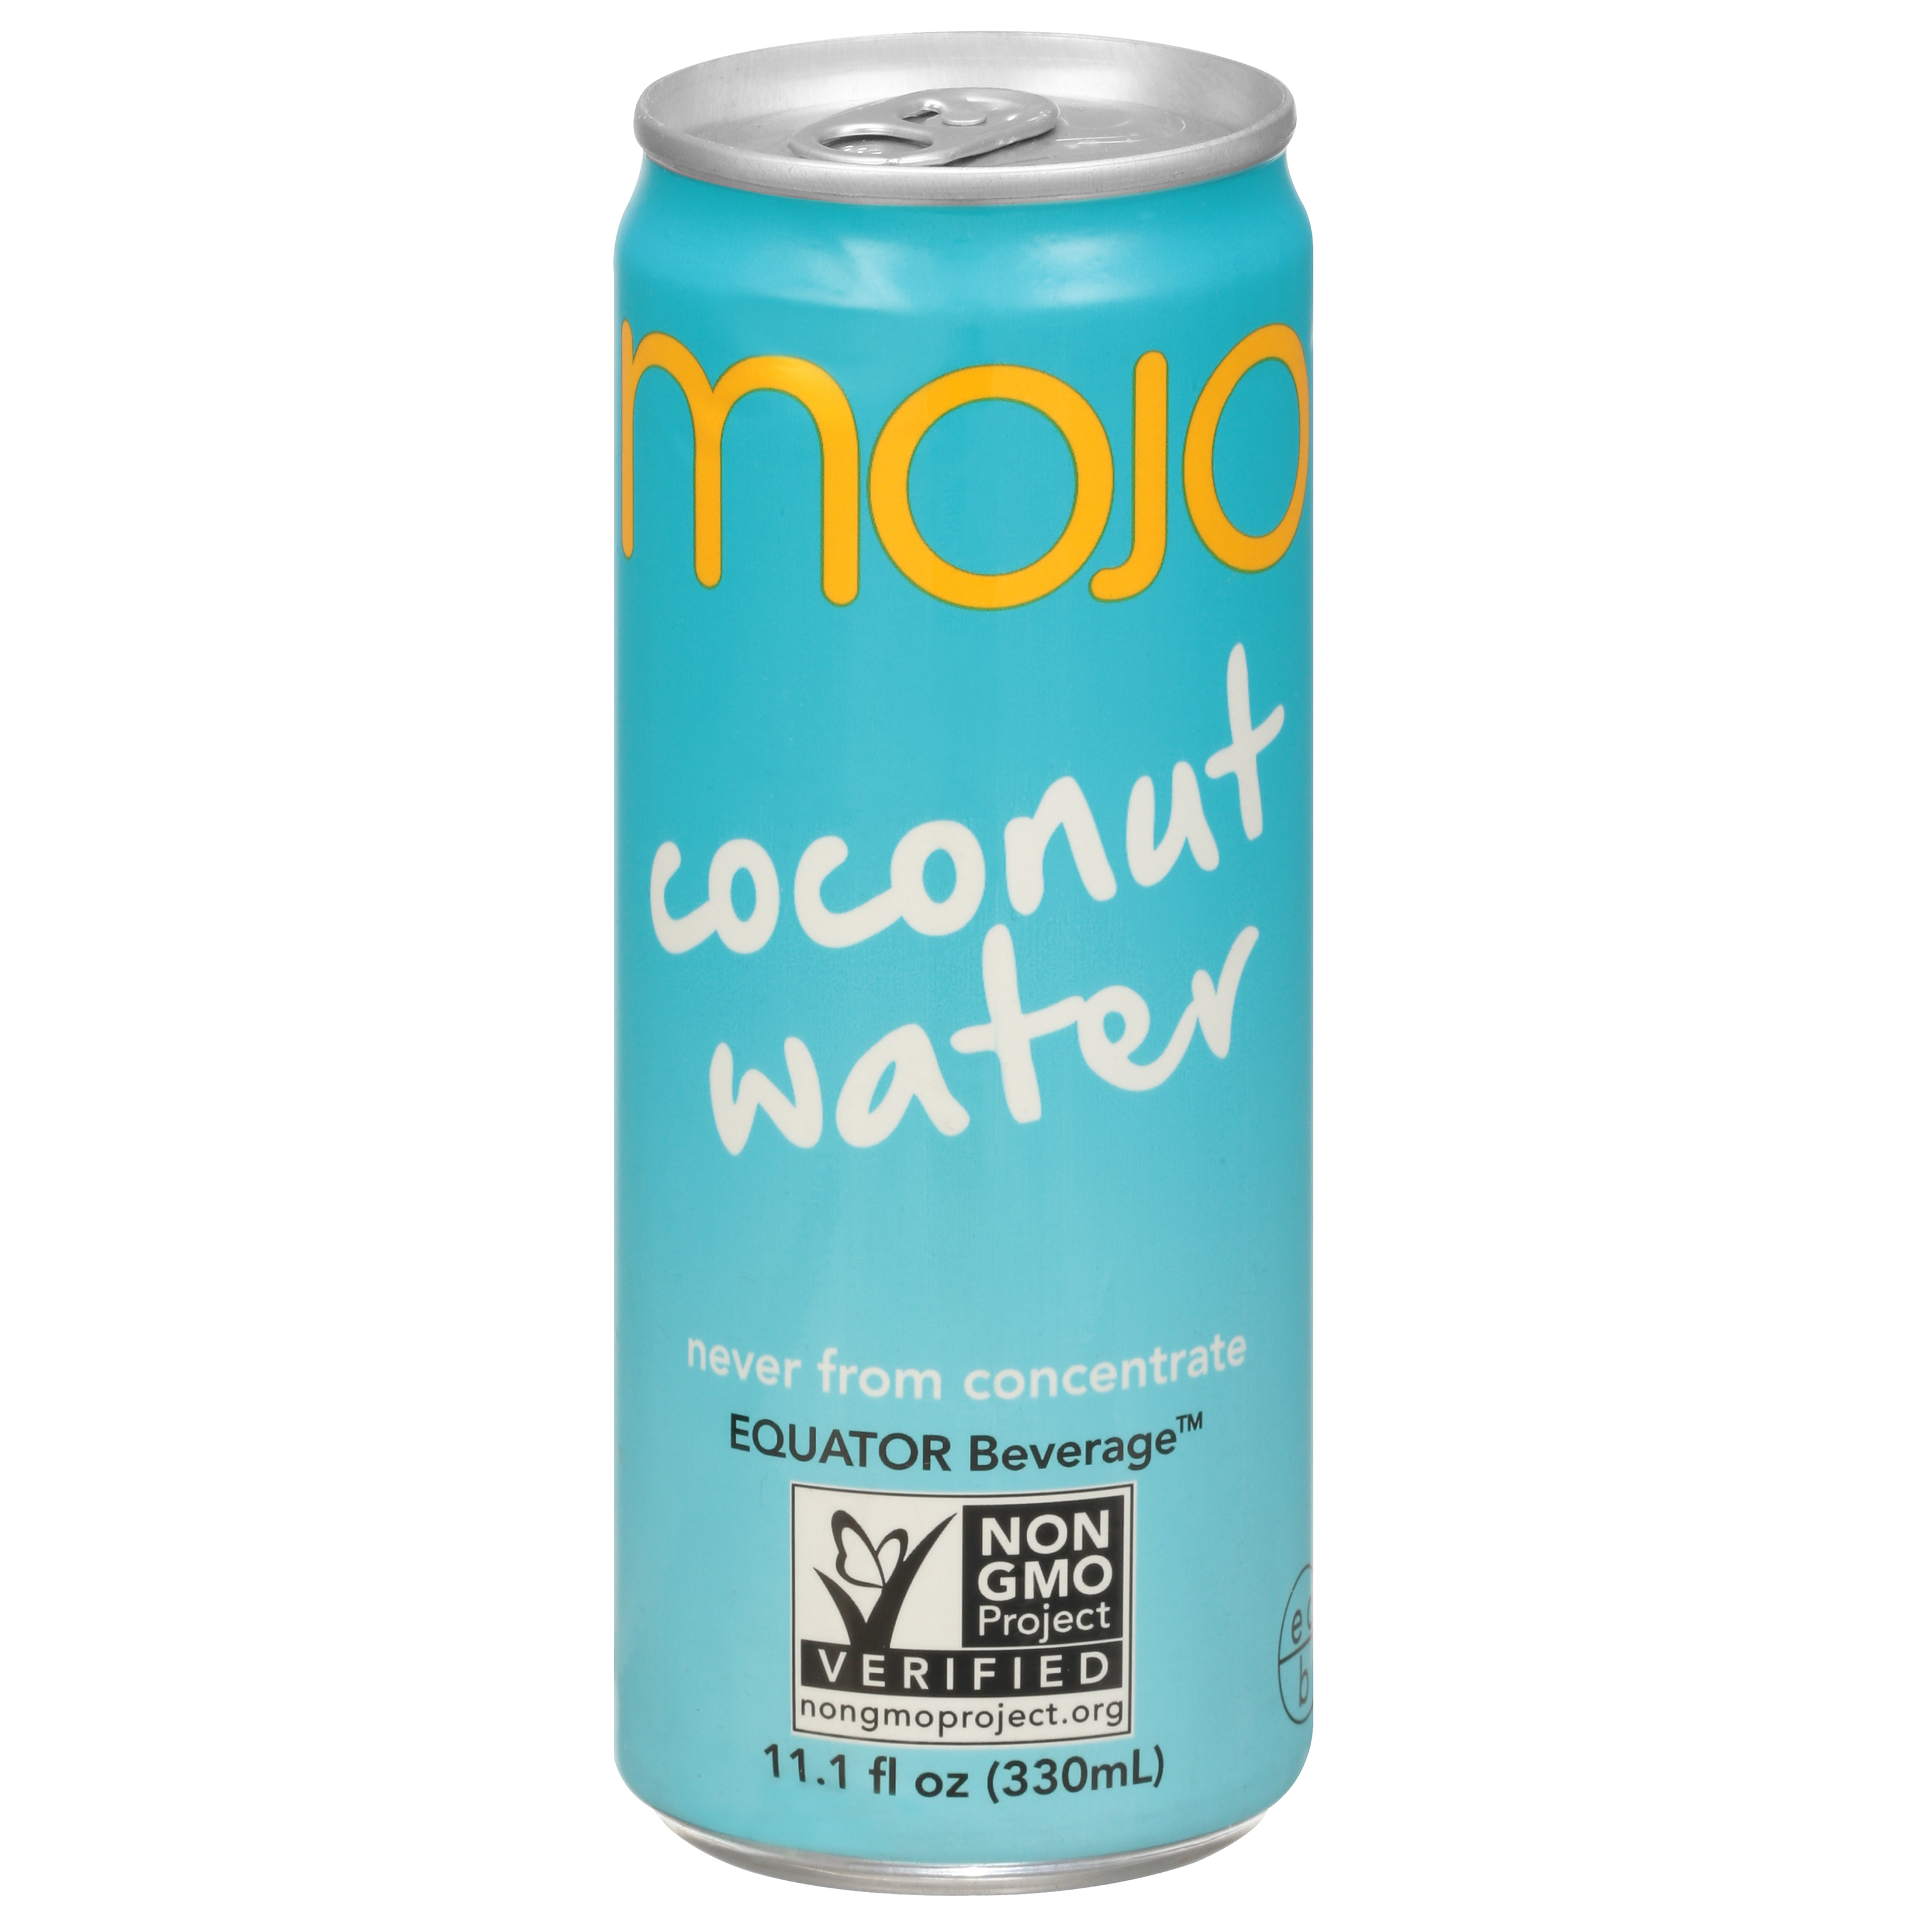 Buy Mojoco Tender Coconut Water Online at Best Price of Rs 30